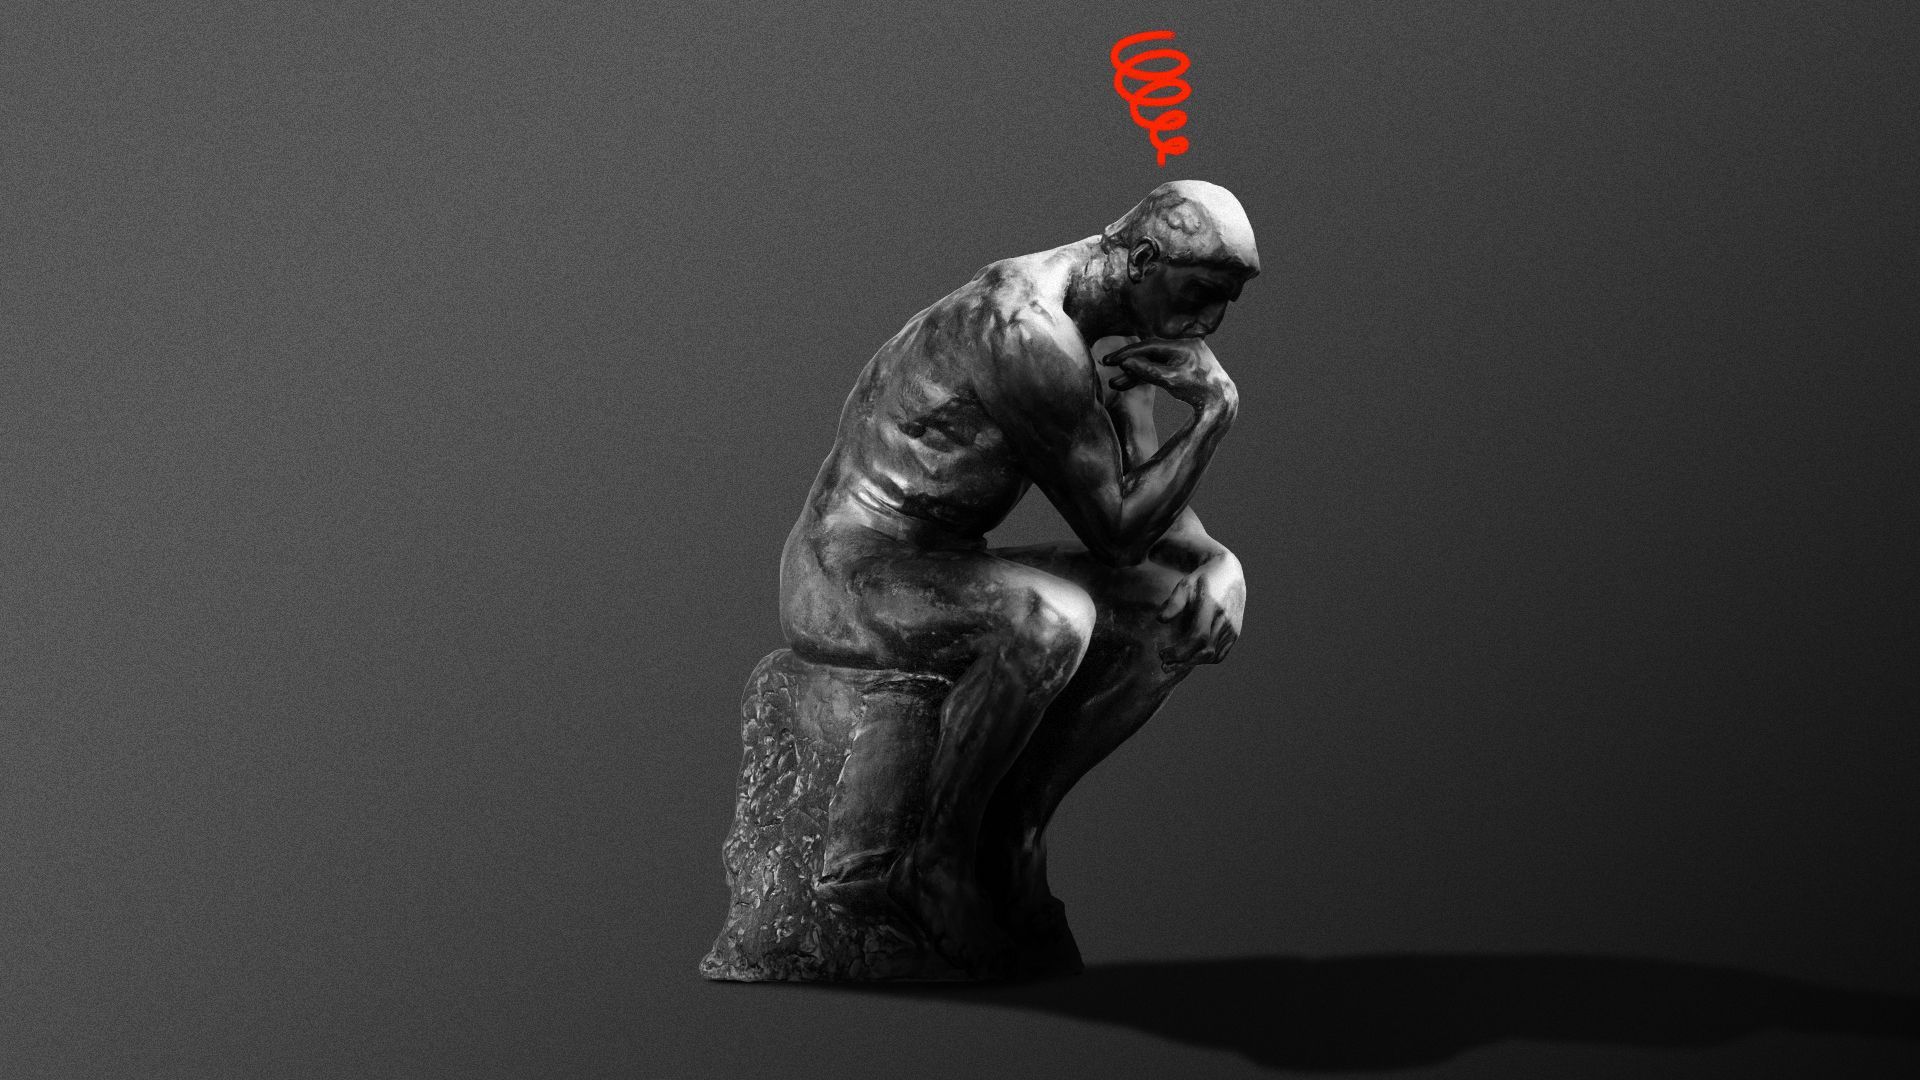 Illustration of the "Thinker" statue with an angry spiral over his head.